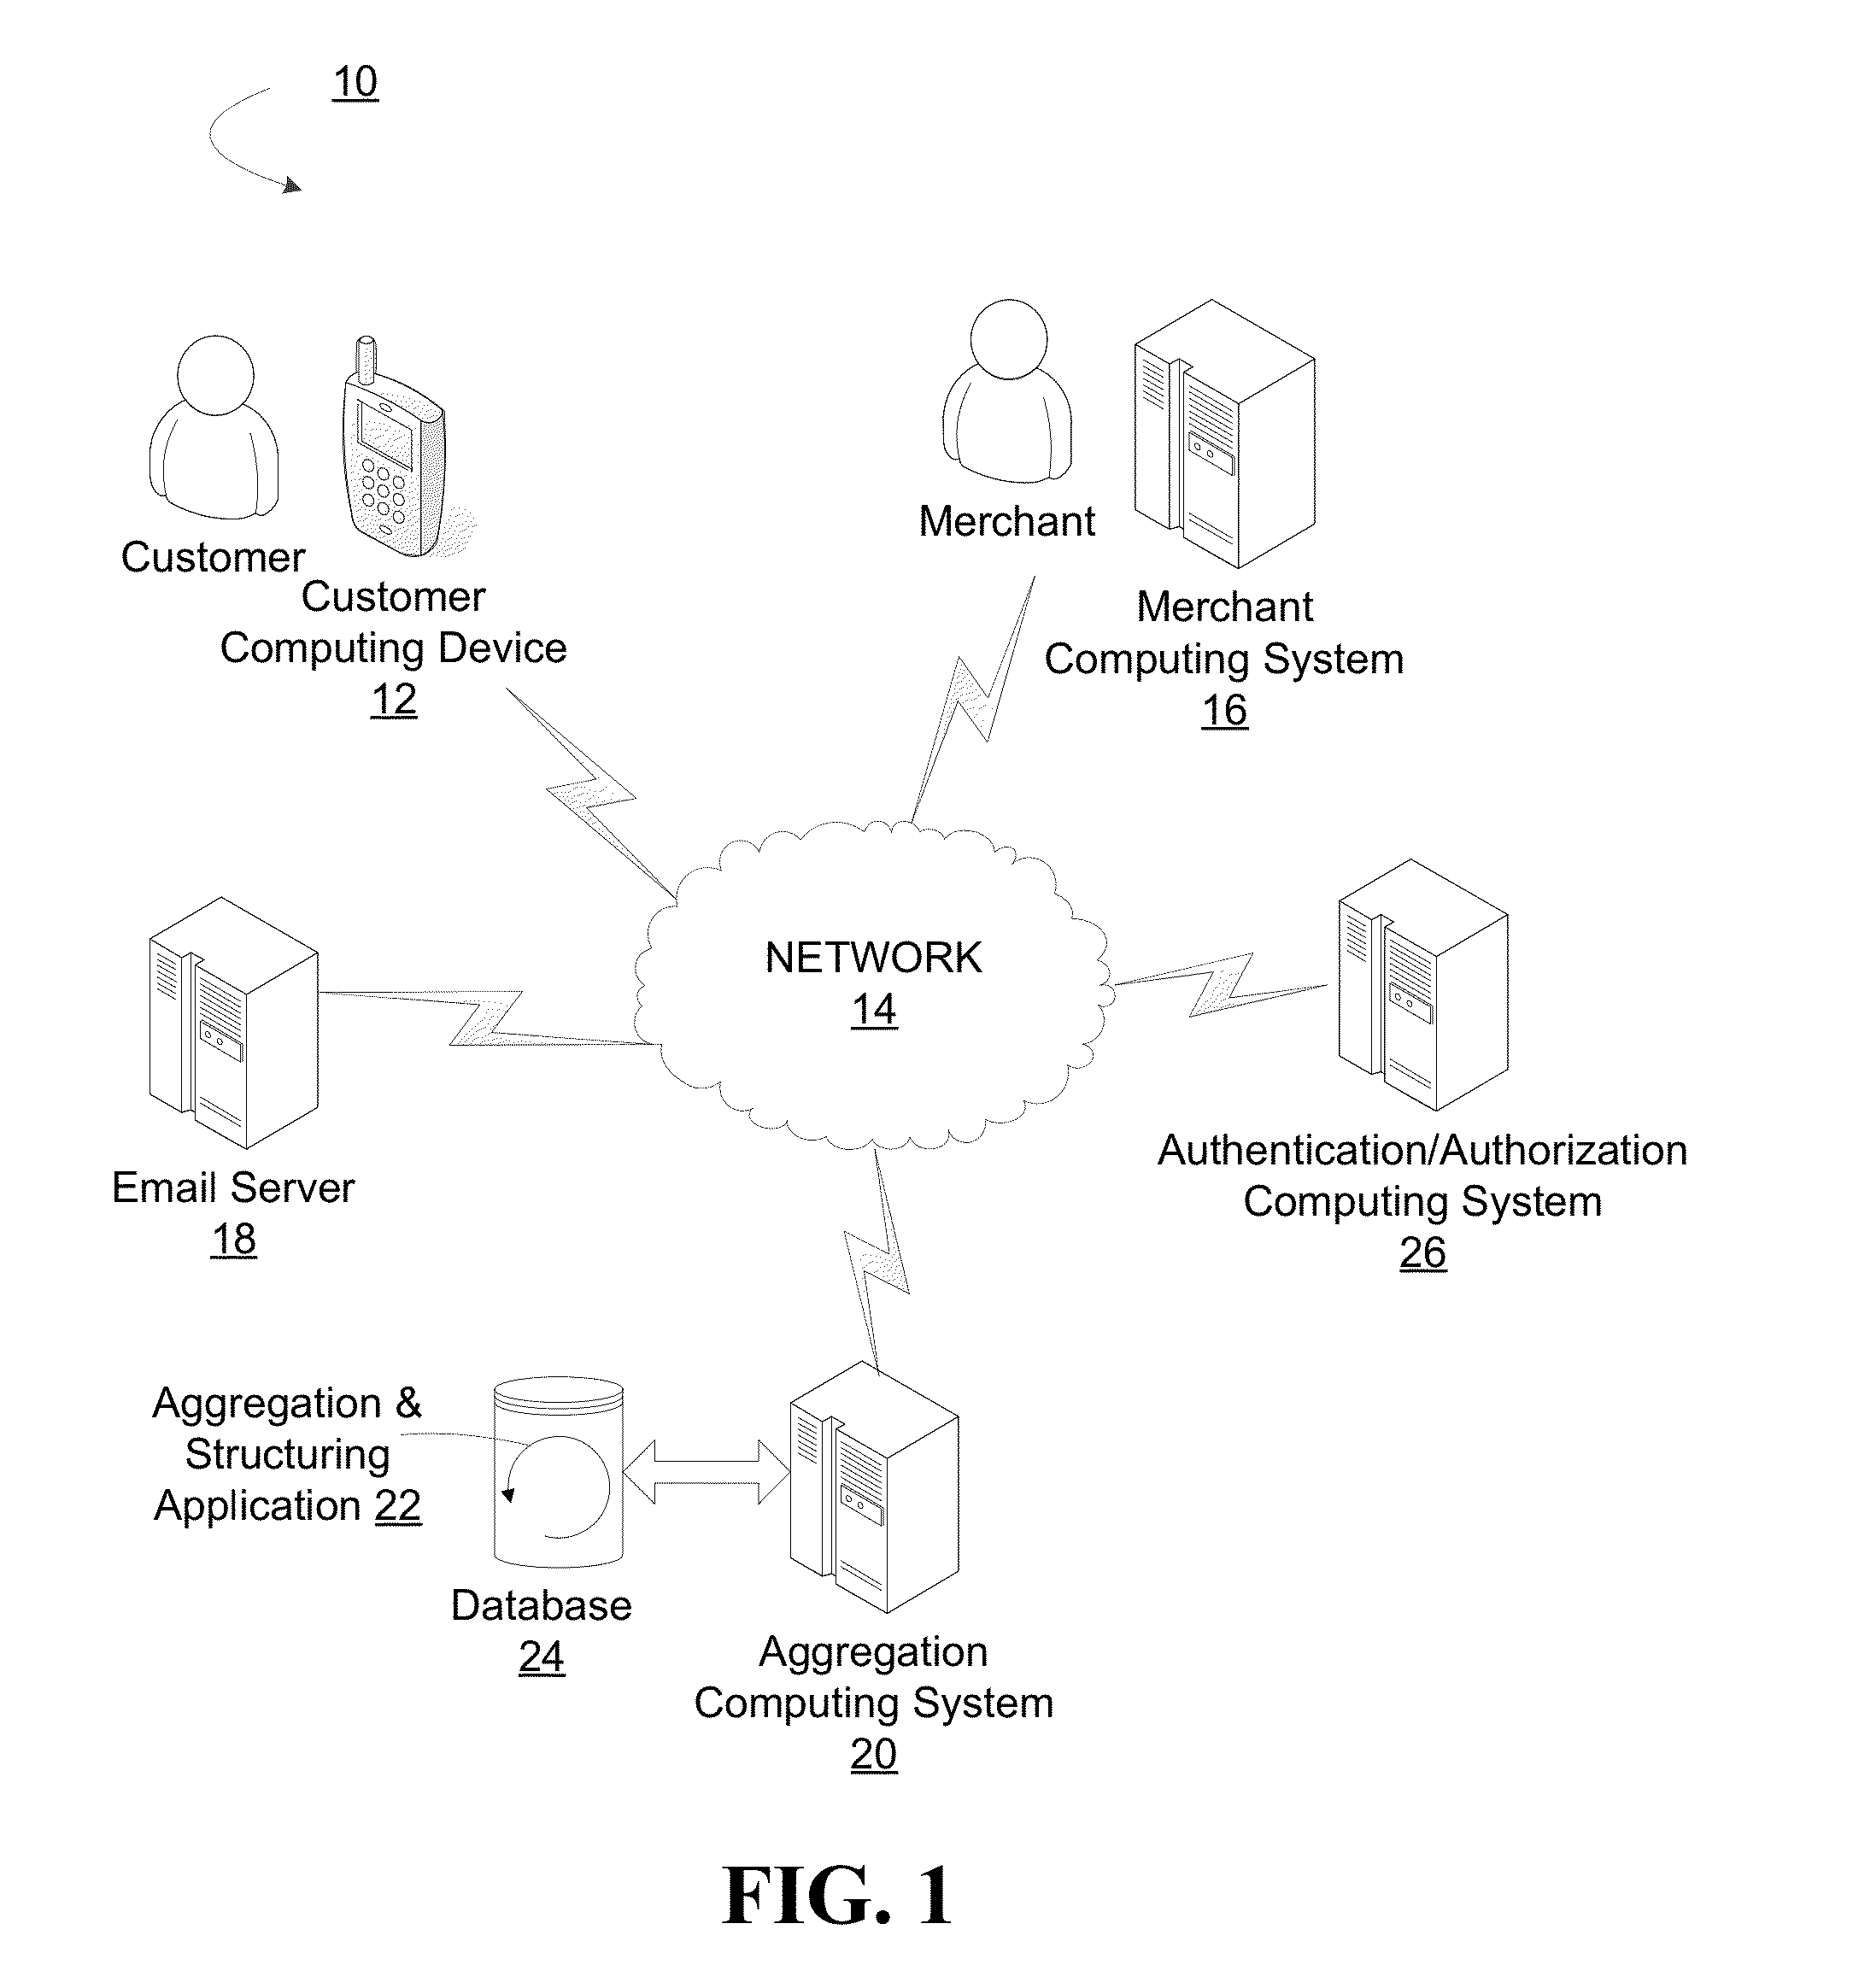 Aggregation of item-level transaction data for a group of individuals